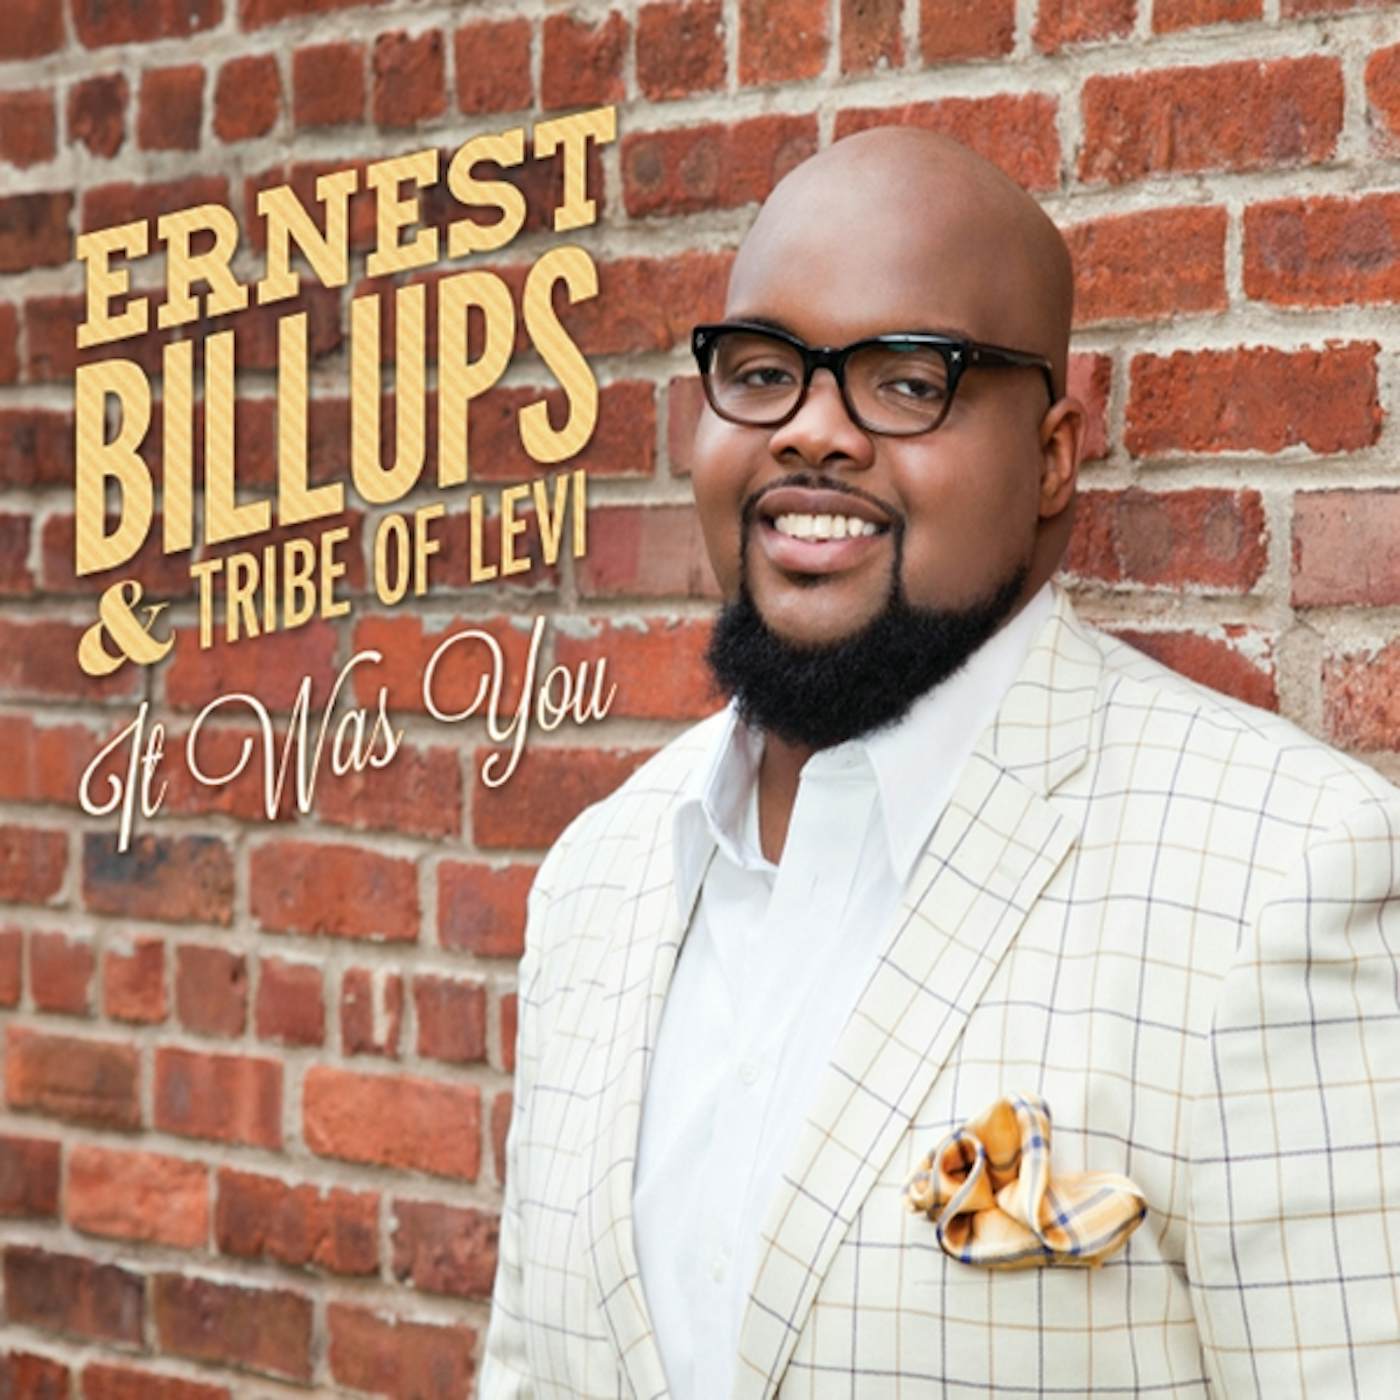 Ernest Billups & Tribe of Levi IT WAS YOU CD